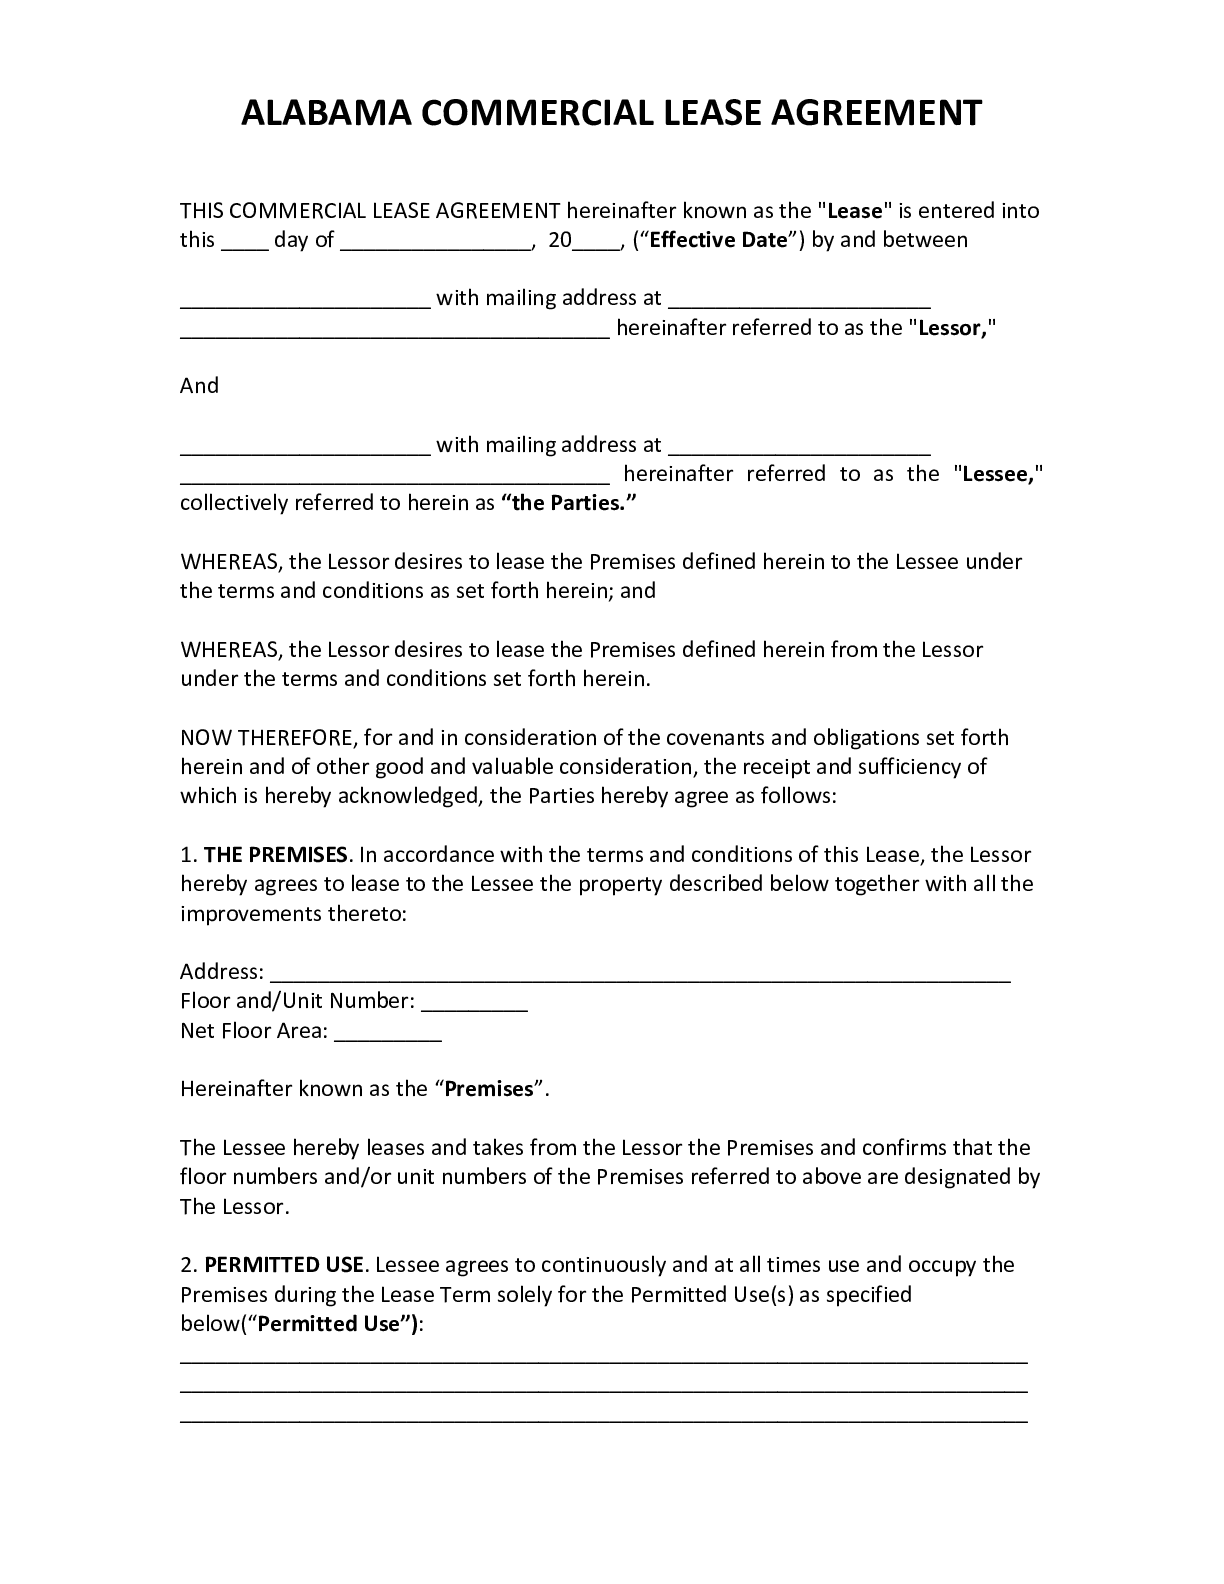 OFFICIAL Alabama Commercial Lease Agreement 2020 PDF Form